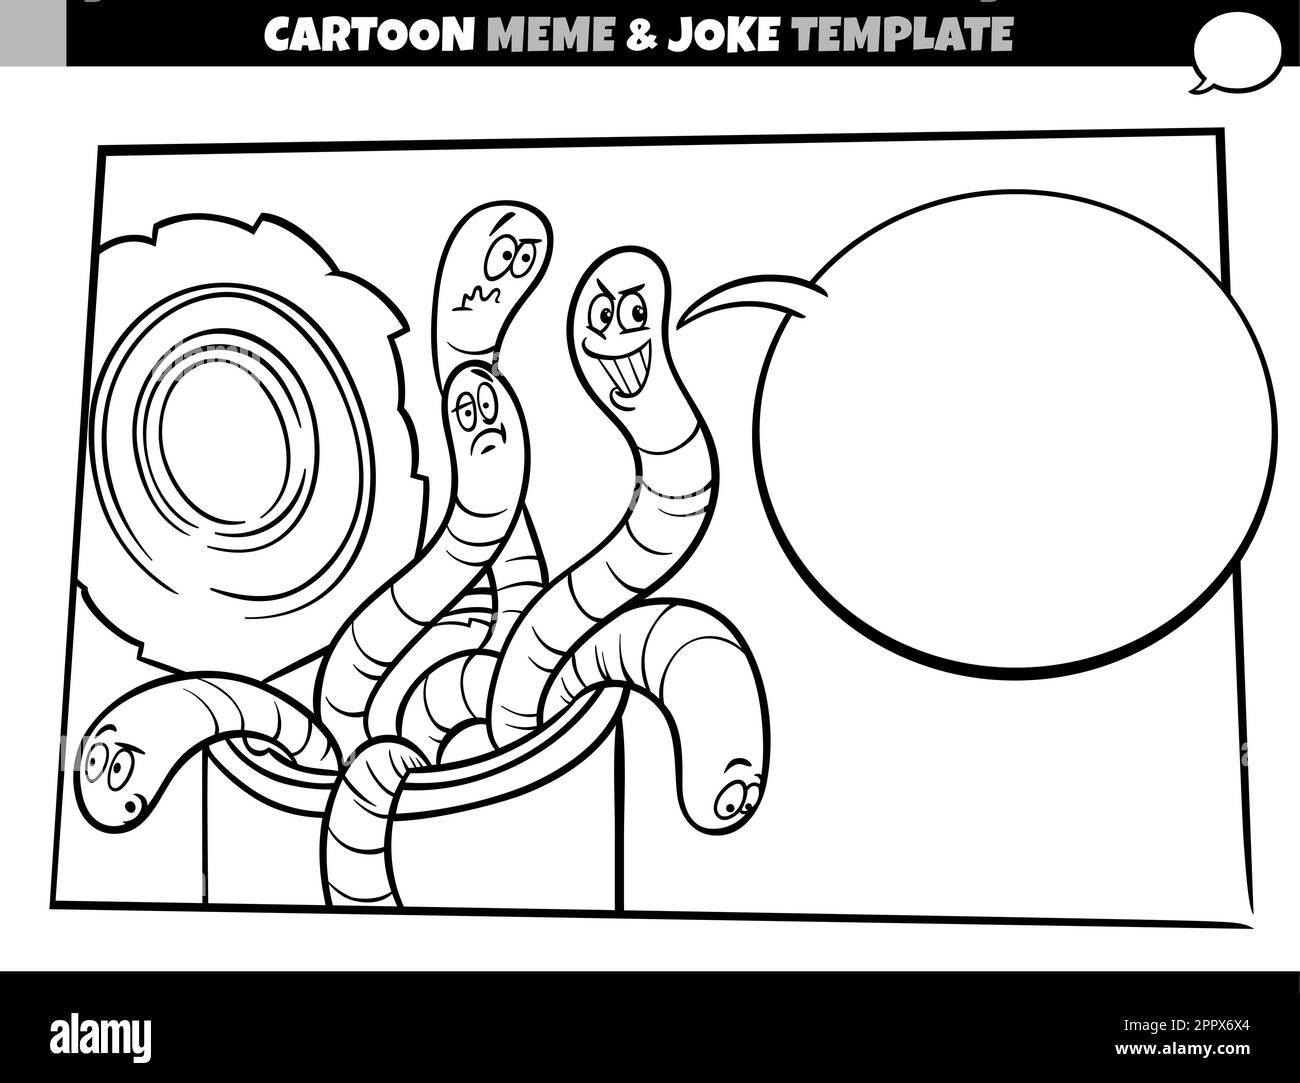 black and white cartoon meme template with can of worms Stock Vector